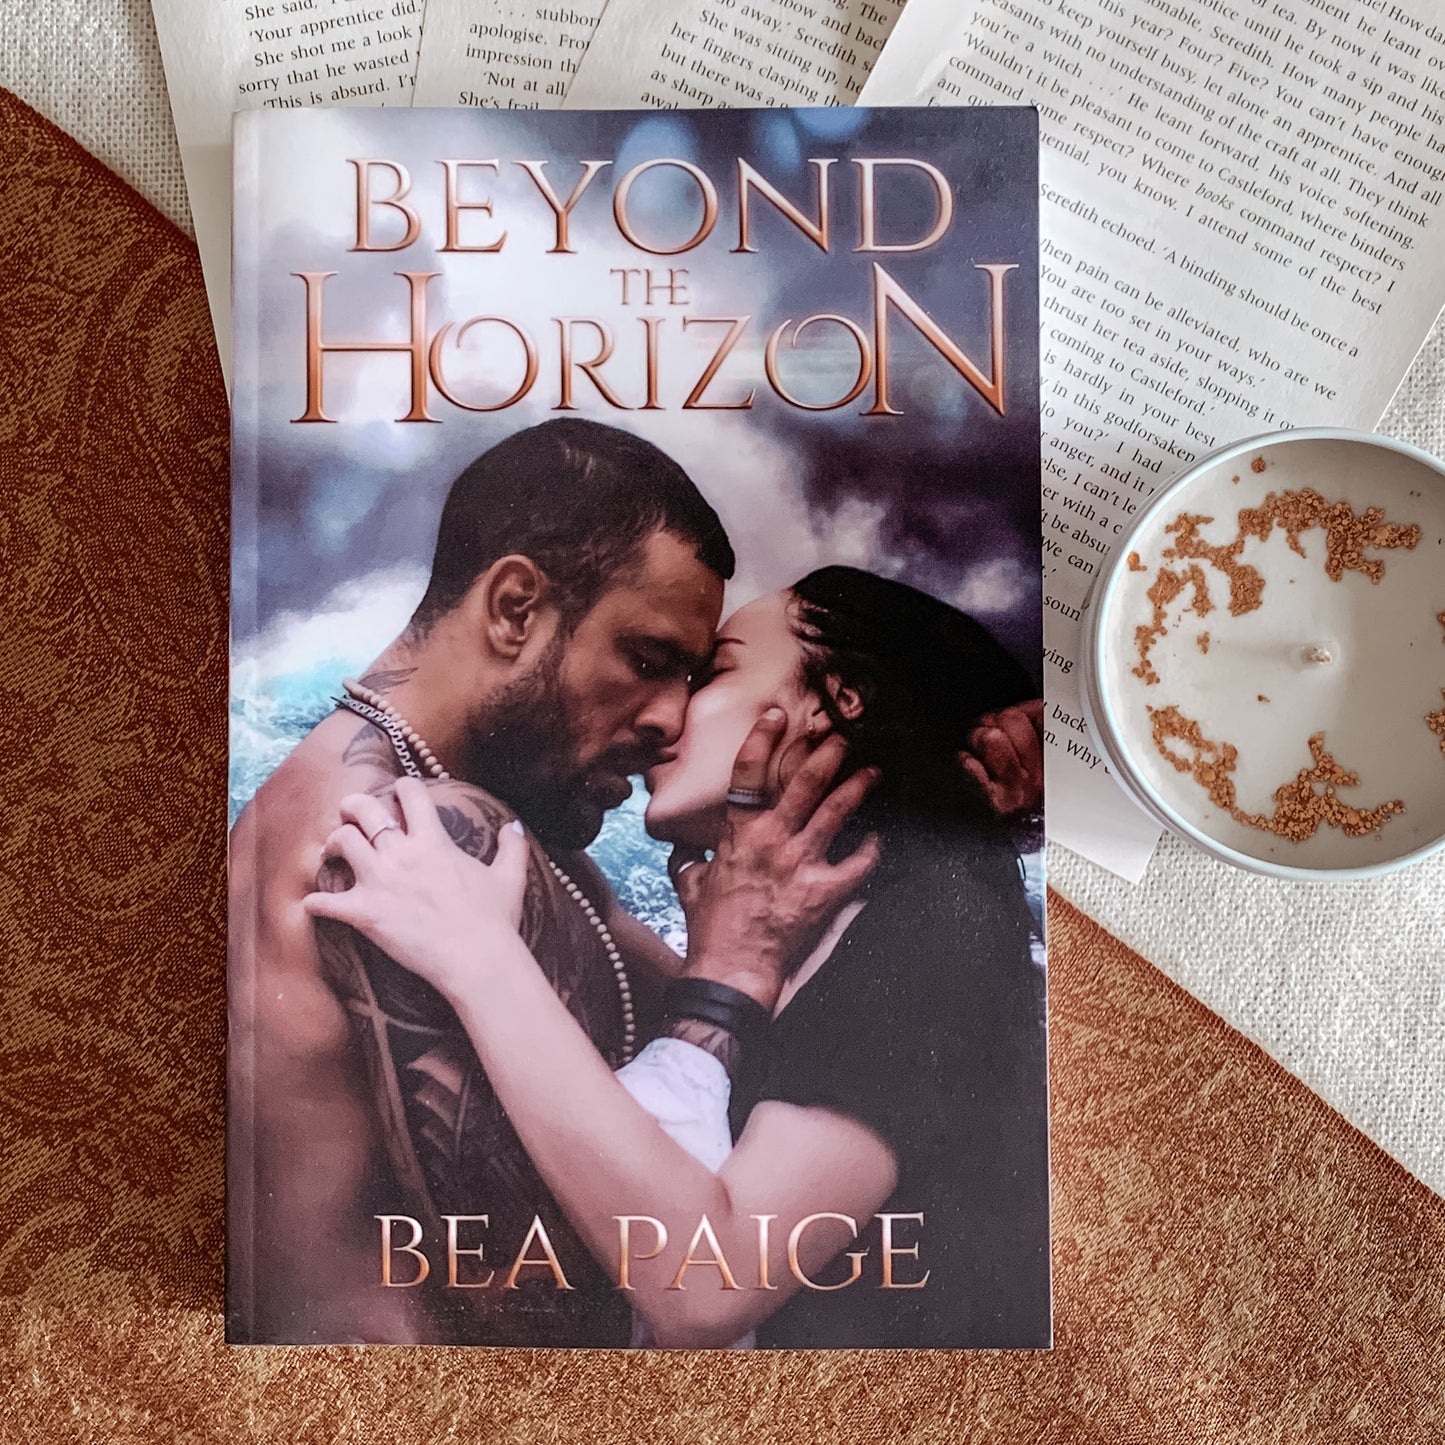 Beyond the Horizon by Bea Paige